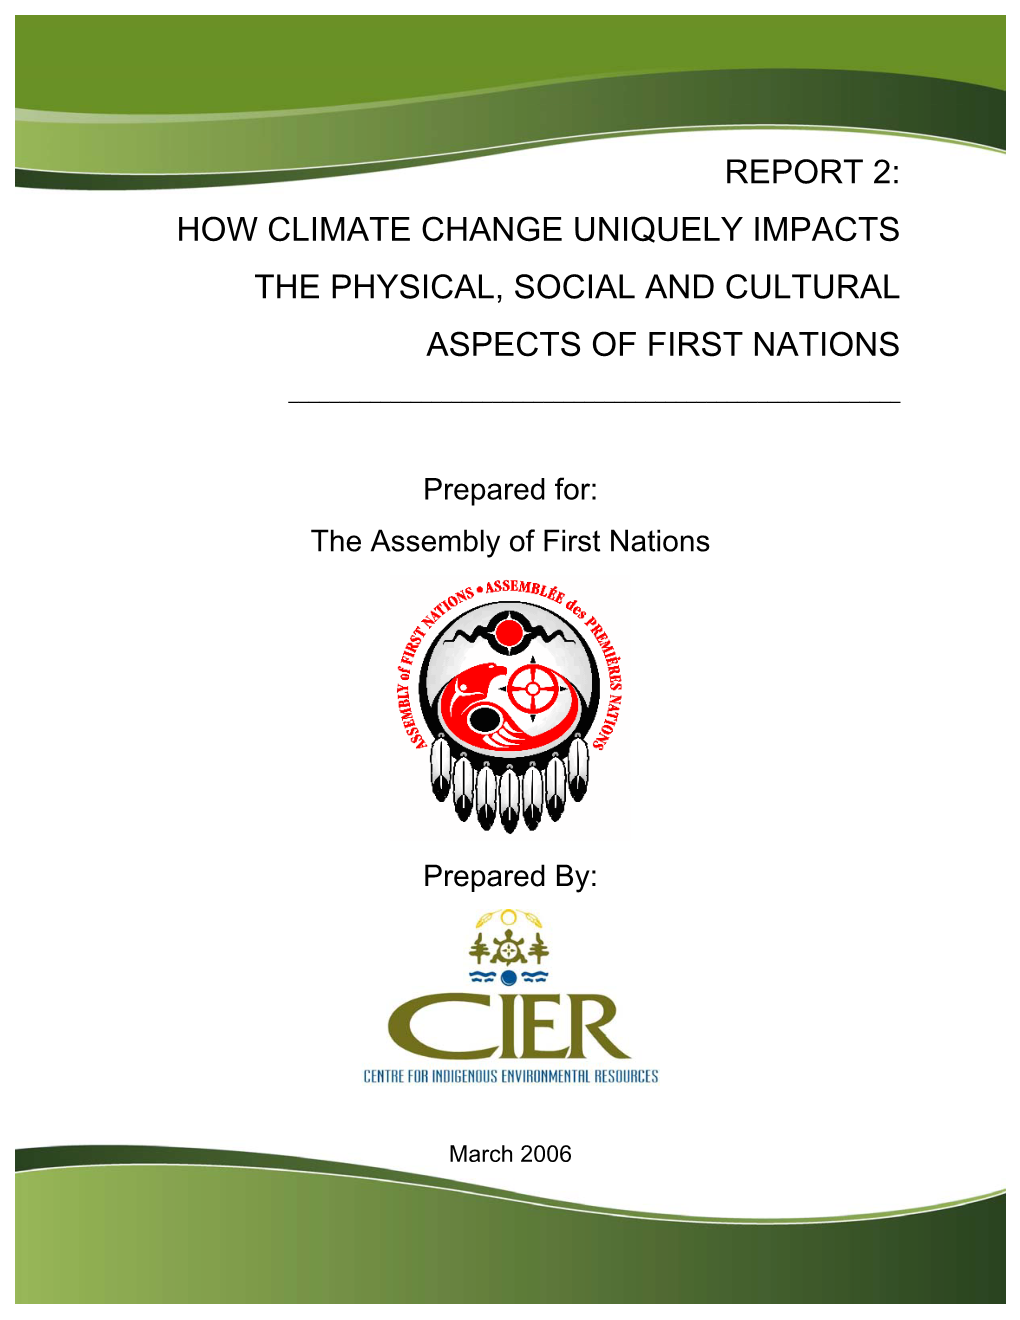 Report 2: How Climate Change Uniquely Impacts the Physical, Social and Cultural